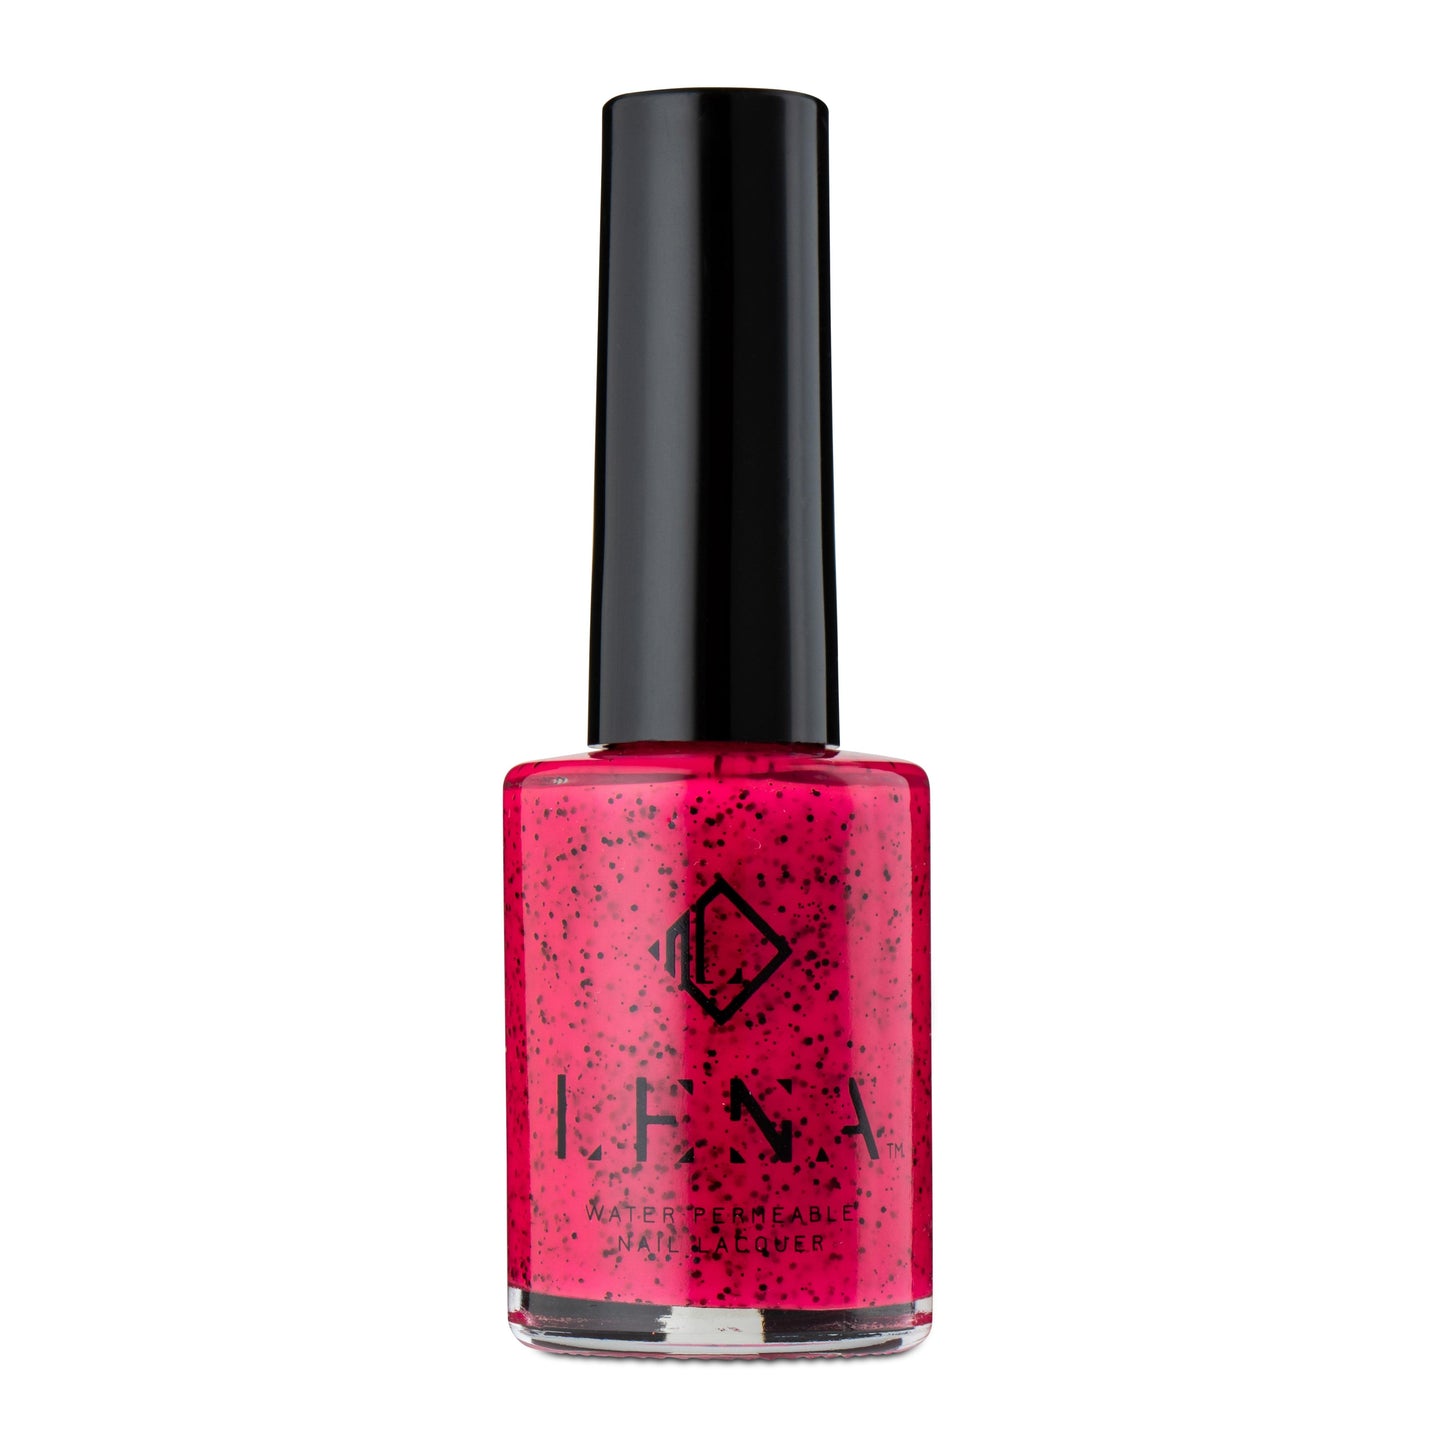 Speckled Pattern Breathable Halal Nail Polish - Water-melon with You? - SE10